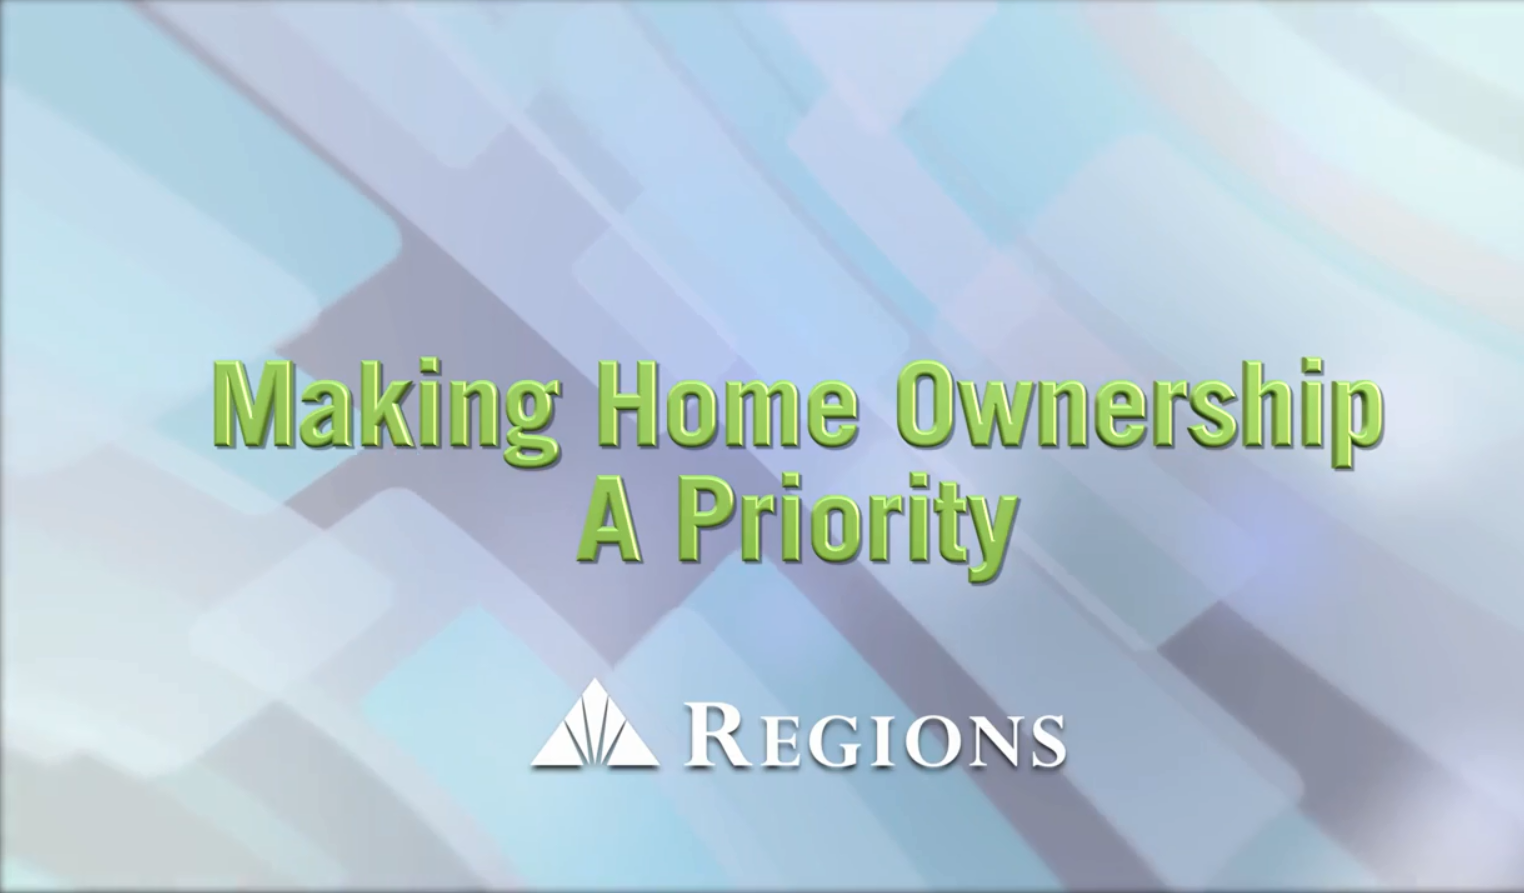 Making Home Ownership a Priority